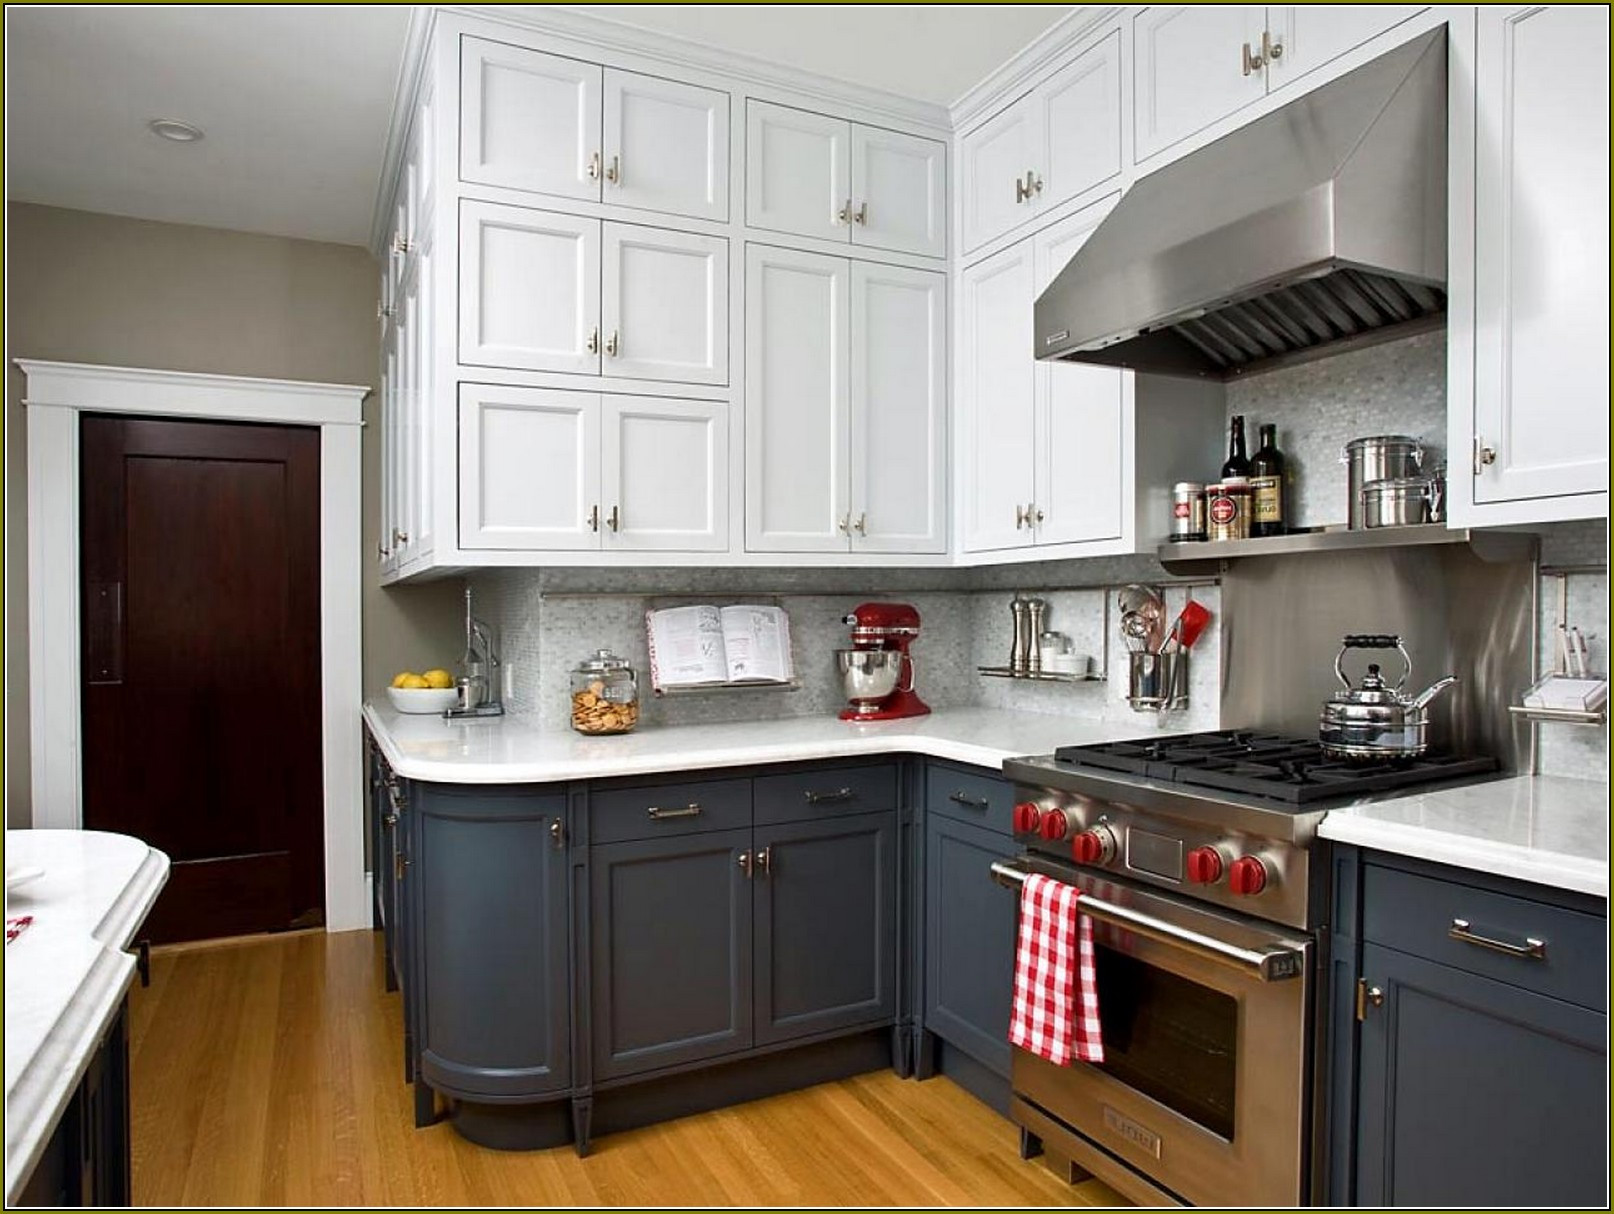 Kitchen Cabinet Color Ideas
 15 Tips To Add Decorative Accents To Your Kitchen